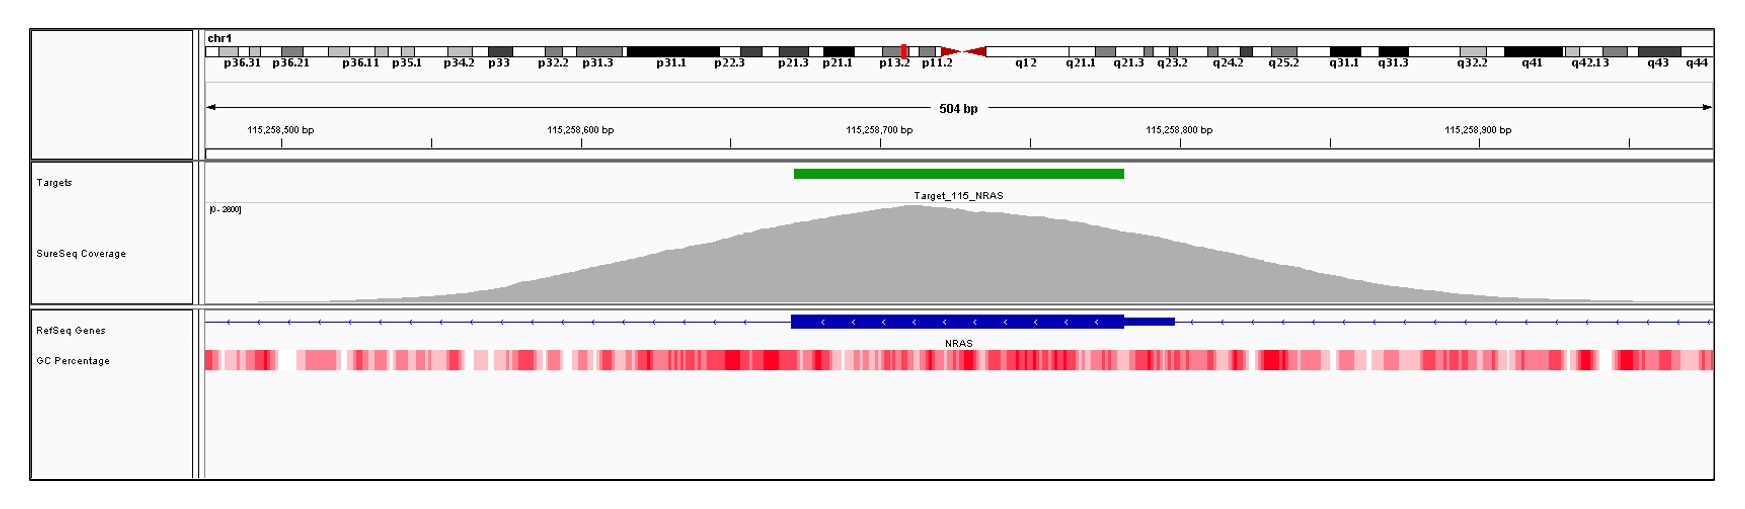 NRAS Exon 2 (hg19 chr1:115258671-115258798). Depth of coverage per base (grey). Targeted region (green). Gene coding region as defined by RefSeq (blue). GC percentage (red).  Image